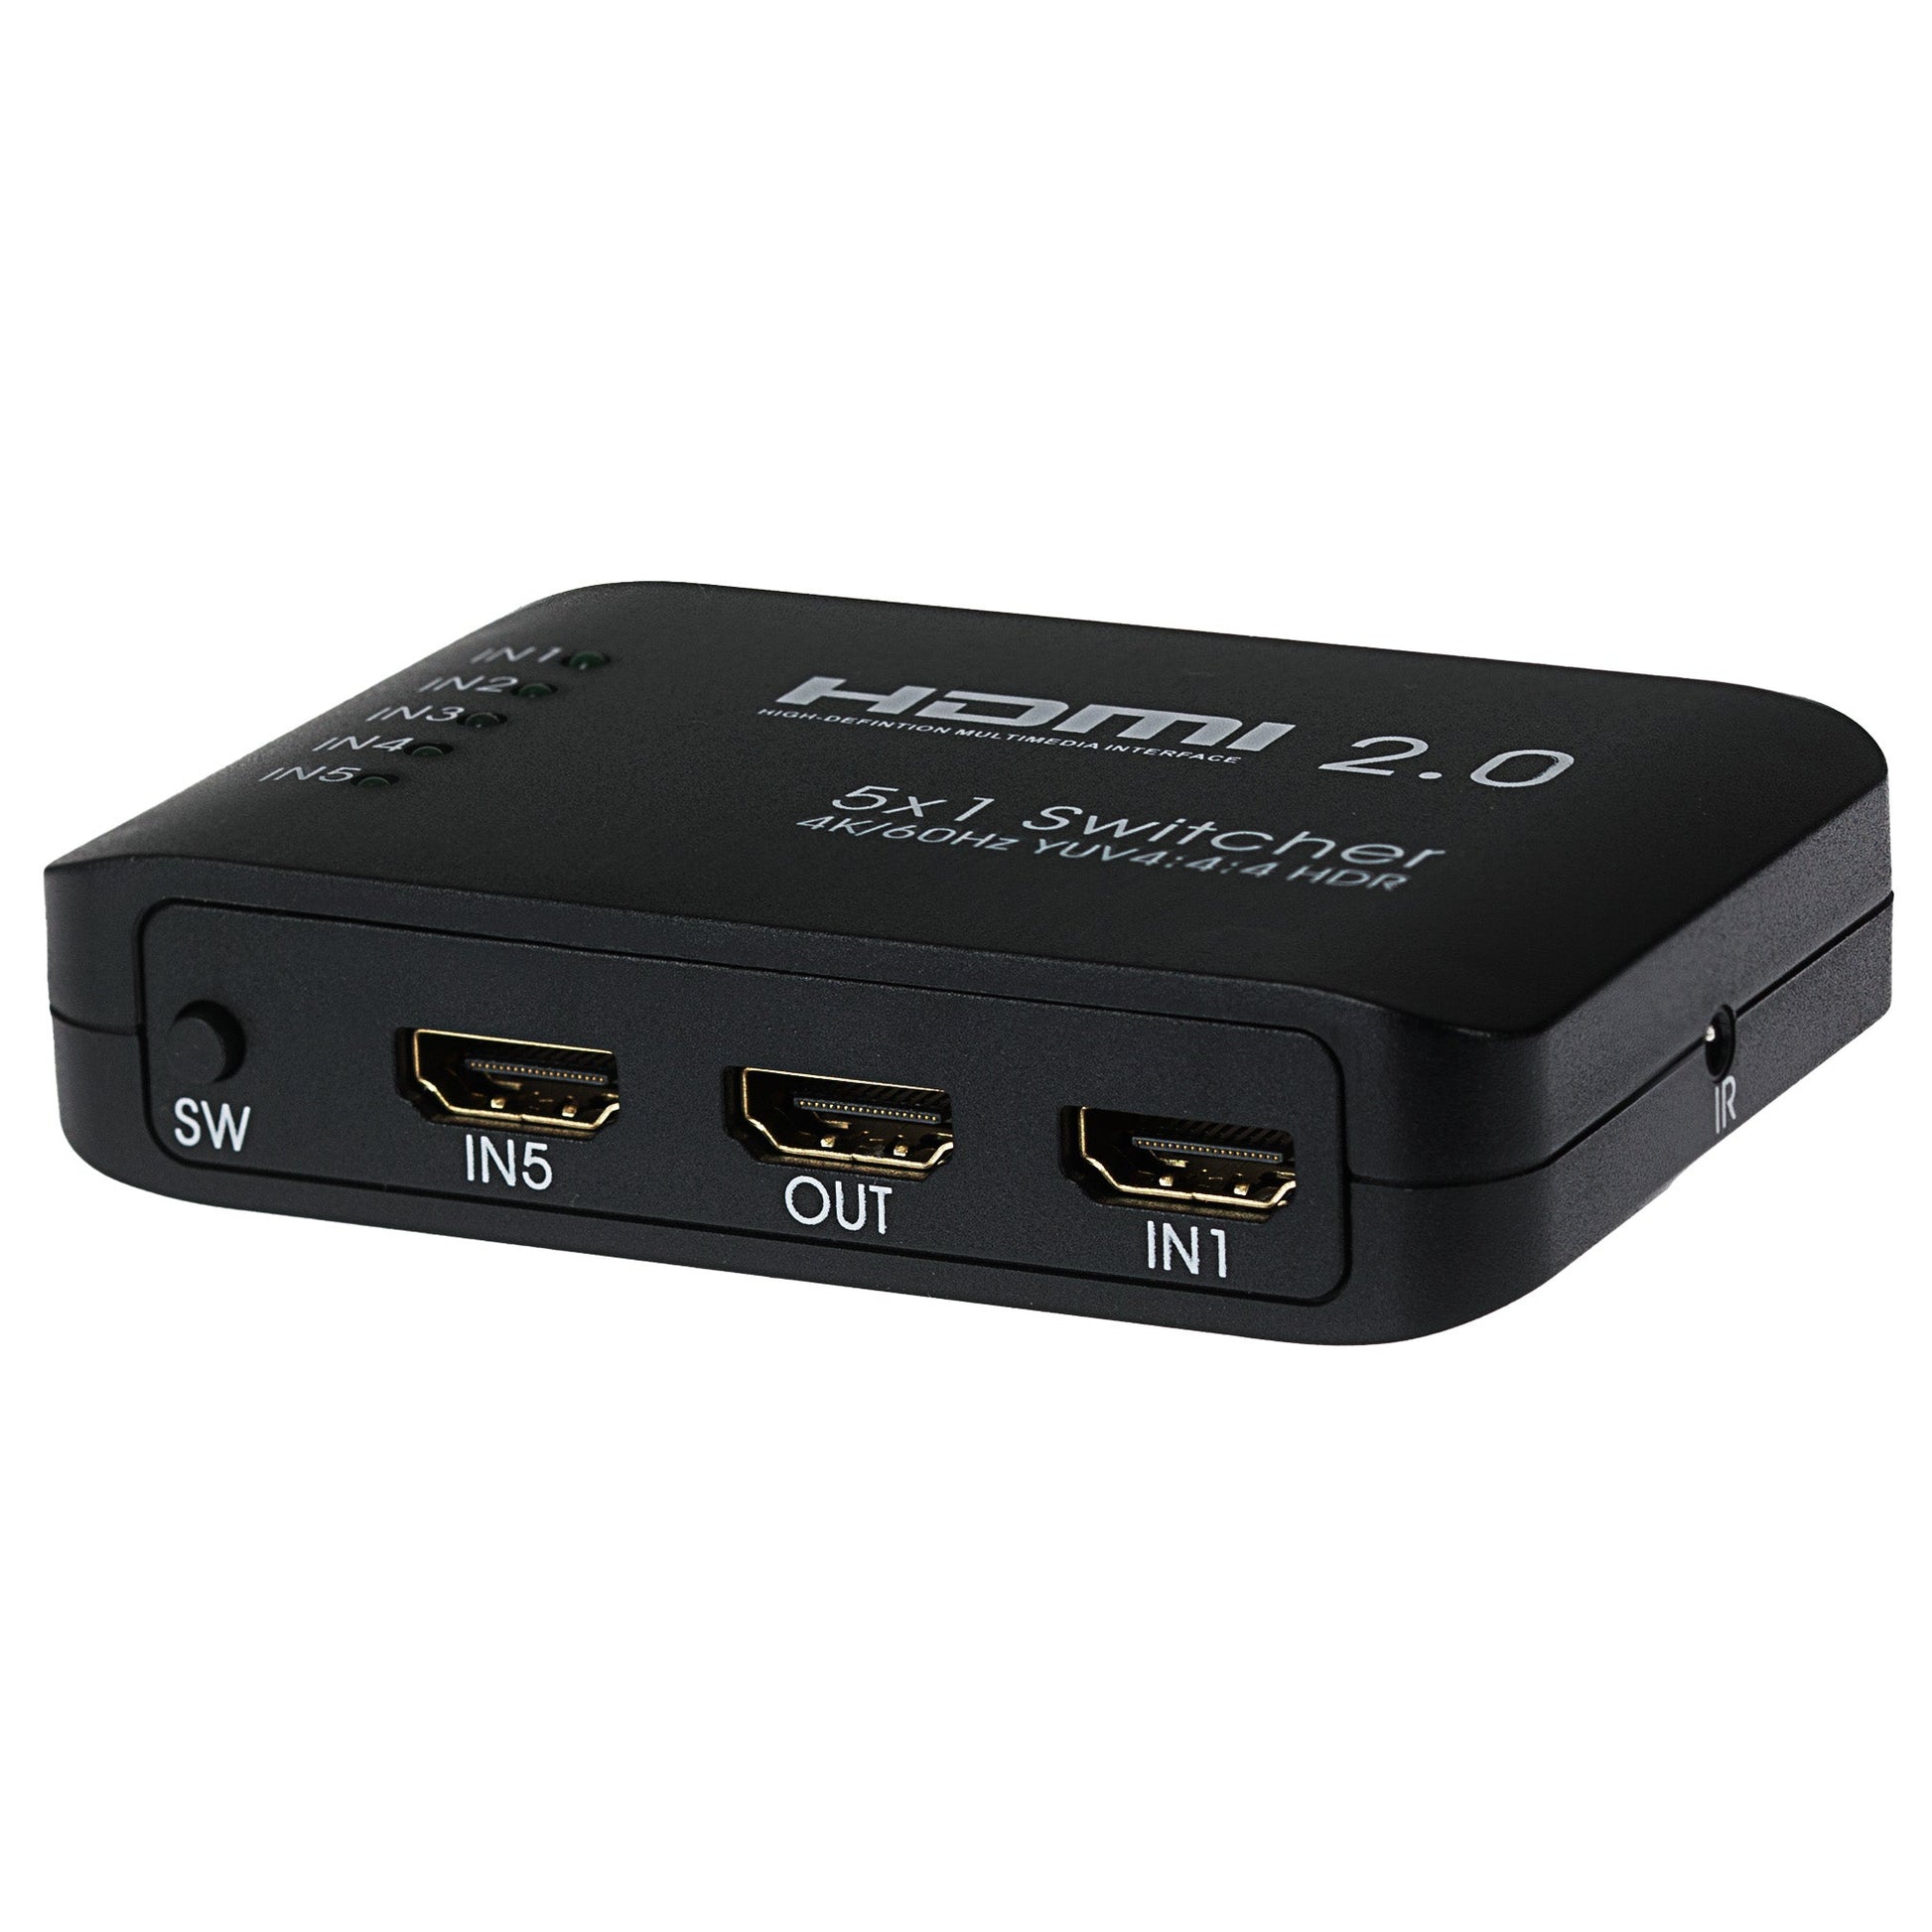 Maplin MPS HDMI Switch 5 Ports In 1 Port Out 4K Ultra HD @60Hz with Remote Control - Black - maplin.co.uk